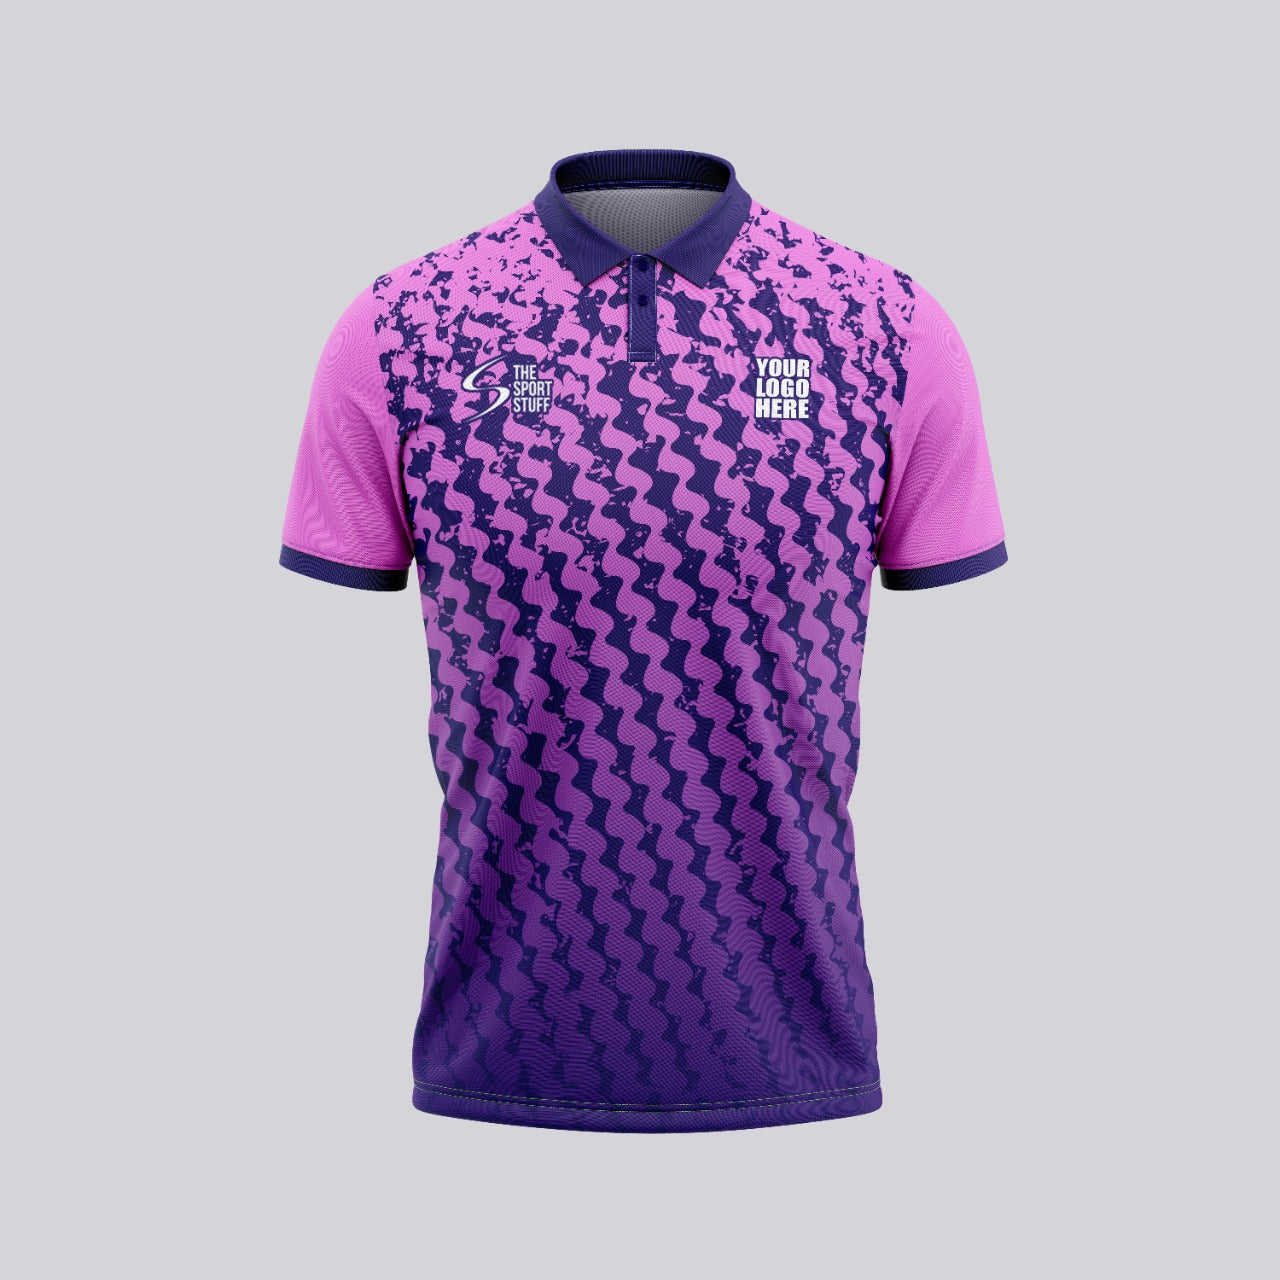 Violet Drip Customized Cricket Team Jersey Design | Customized Cricket Jerseys Online India - TheSportStuff With Trackpant / Half Sleeve / Mono